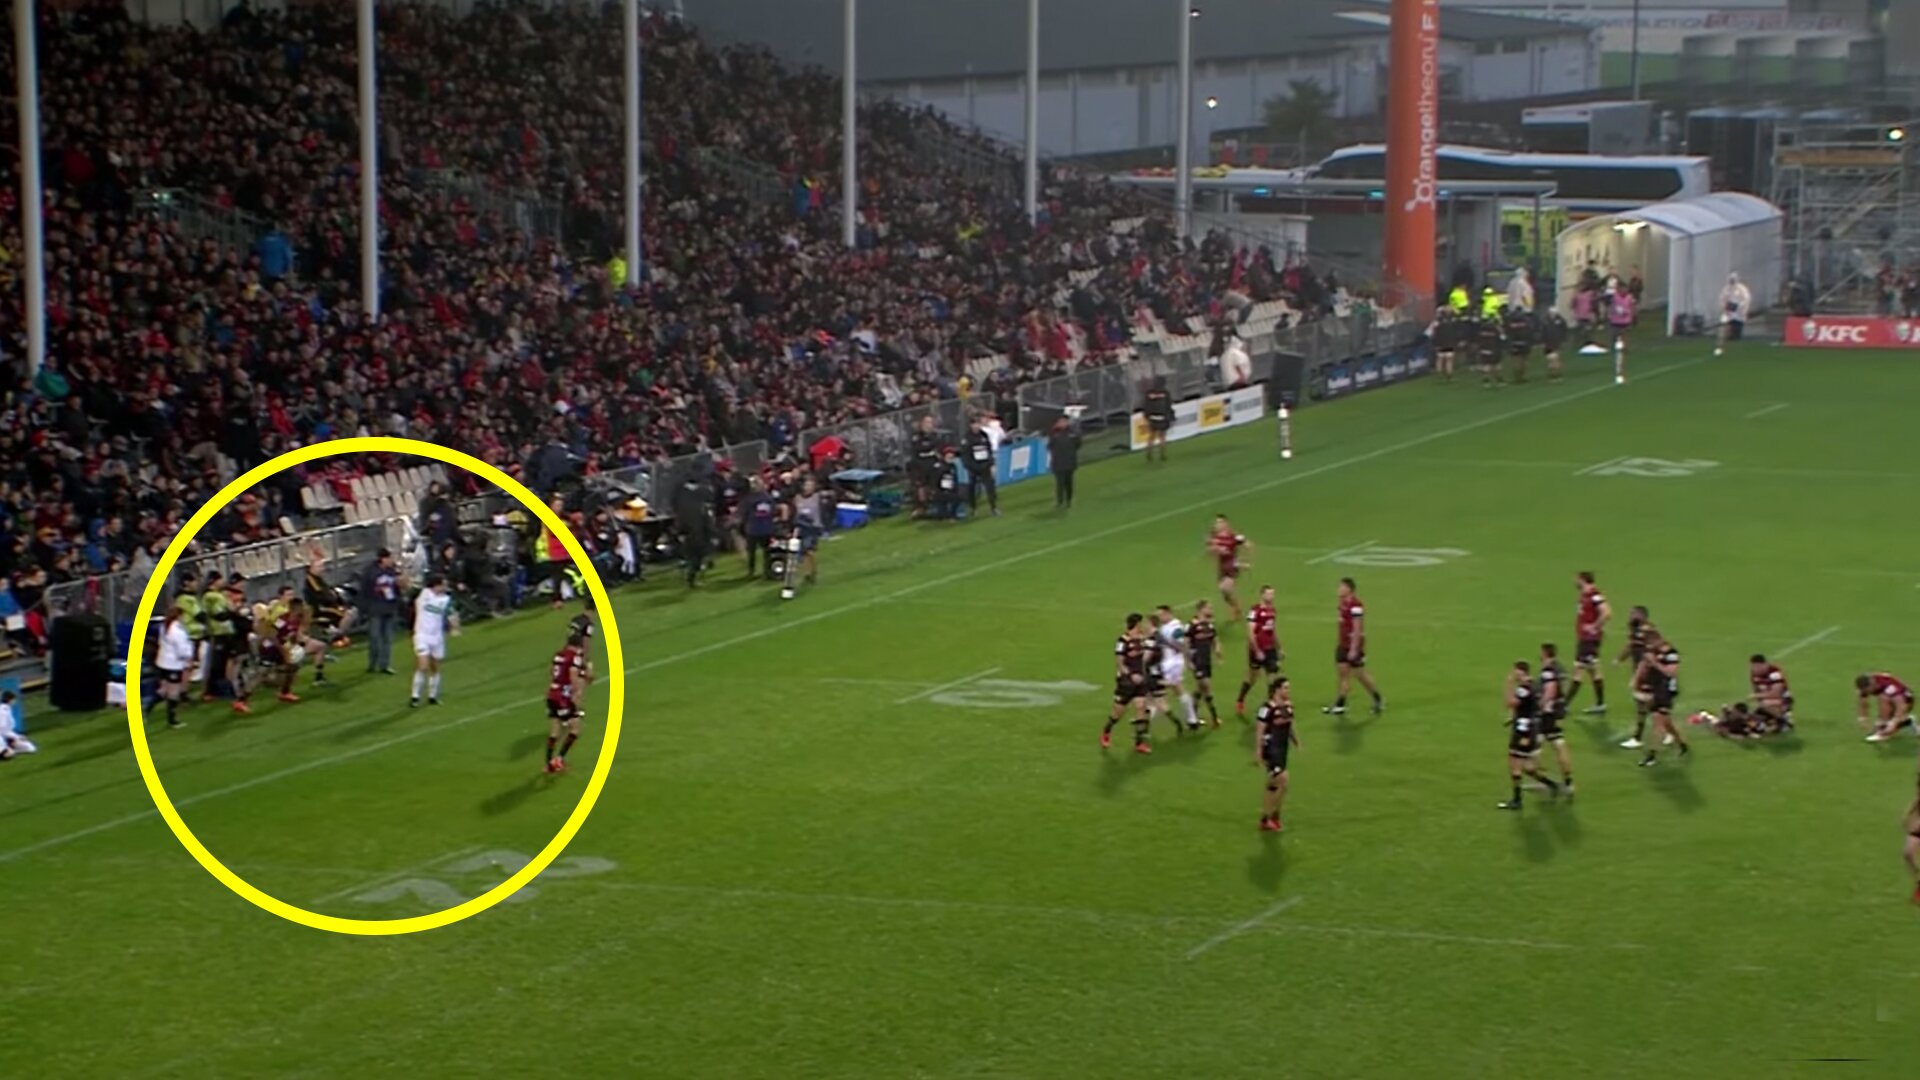 The Crusaders scored one of the sneakiest tries possible against the Chiefs